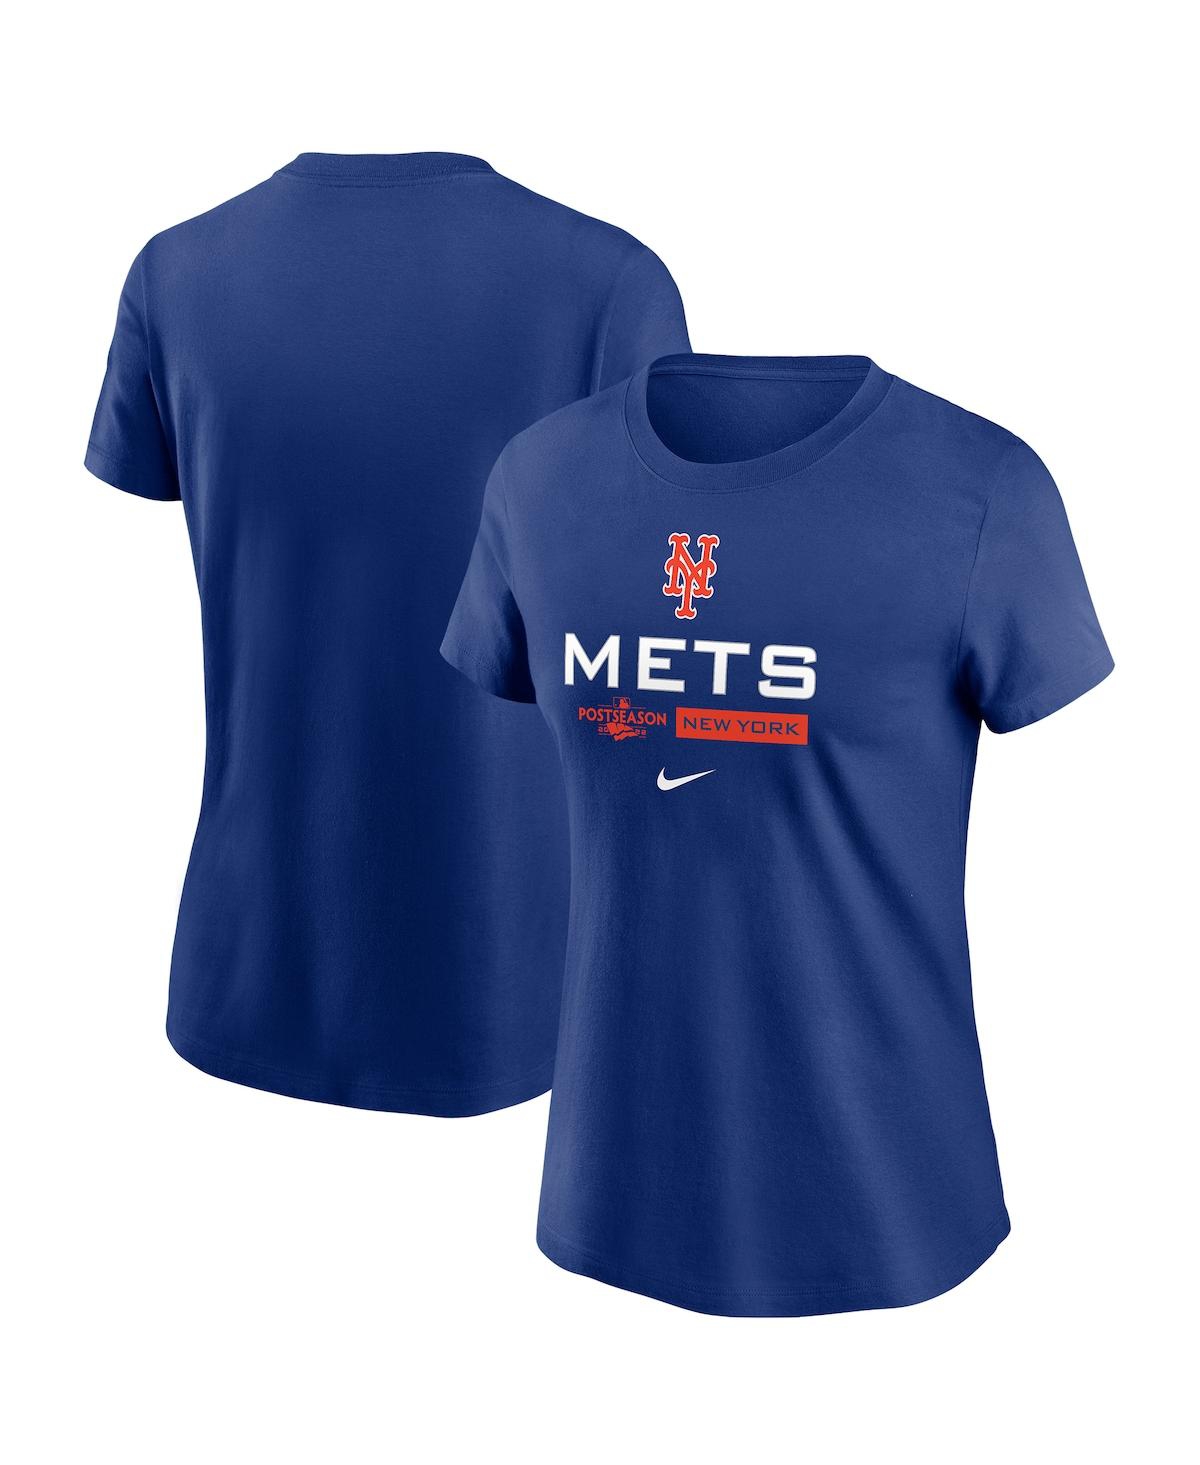 Women's Nike Royal New York Mets 2022 Postseason Authentic Collection Dugout T-shirt